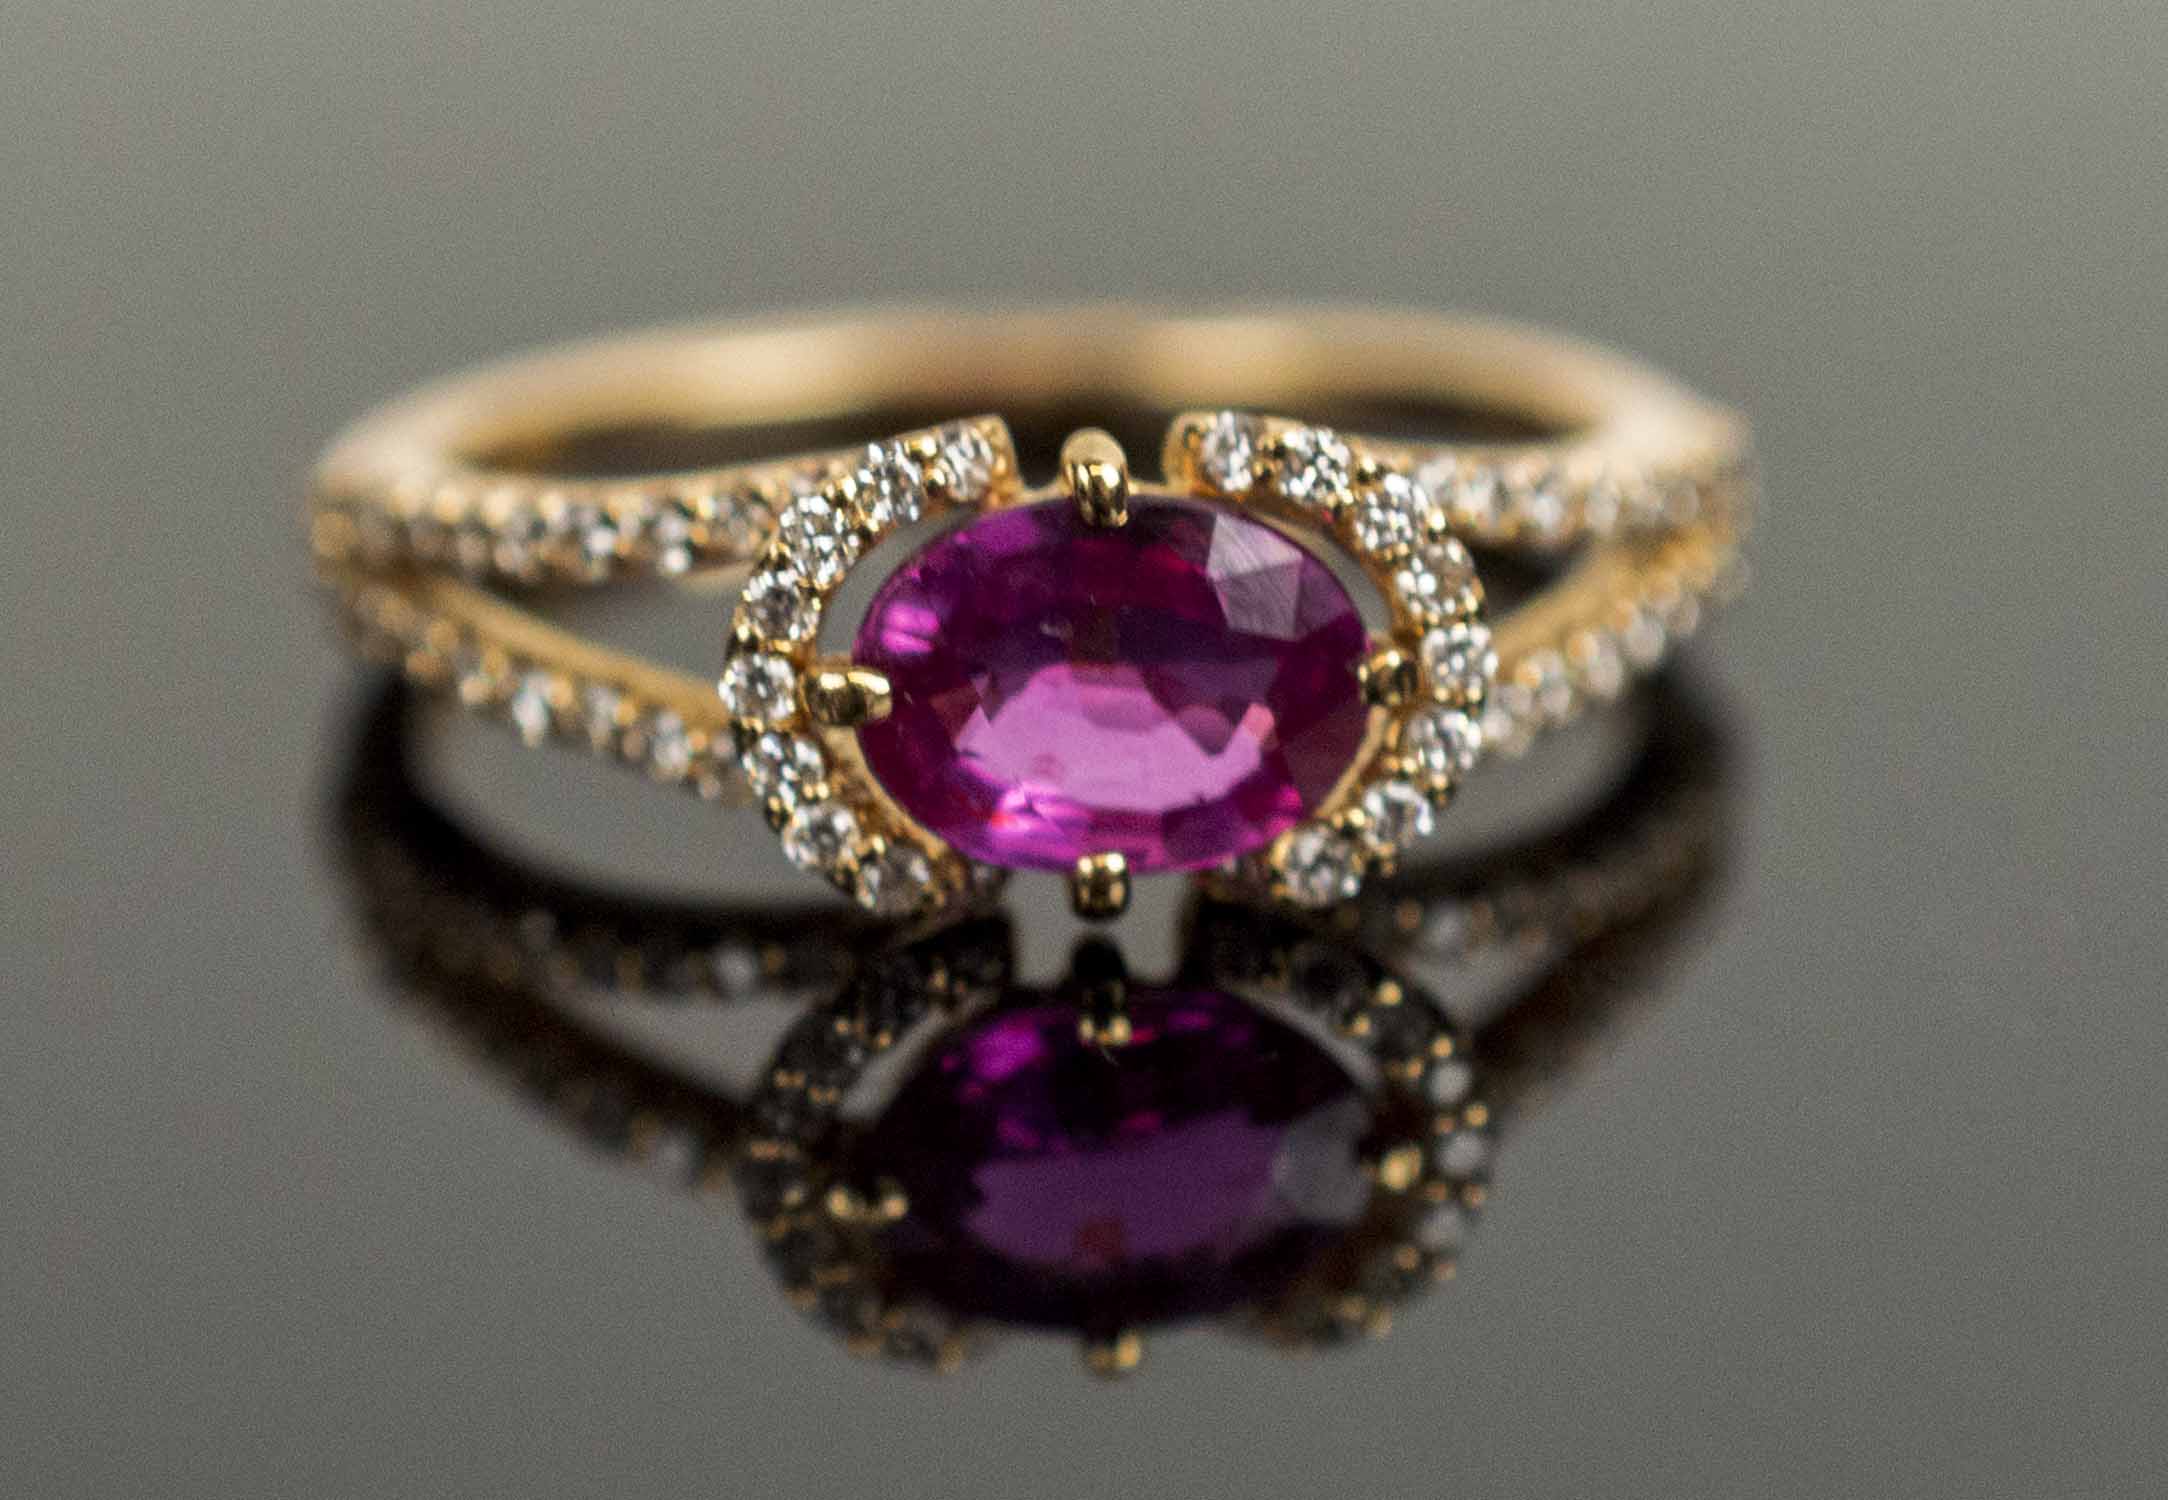 A PINK SAPPHIRE 18k YELLOW GOLD AND MICRO SET DIAMOND DRESS RING, approx. weight of pink sapphire 0.